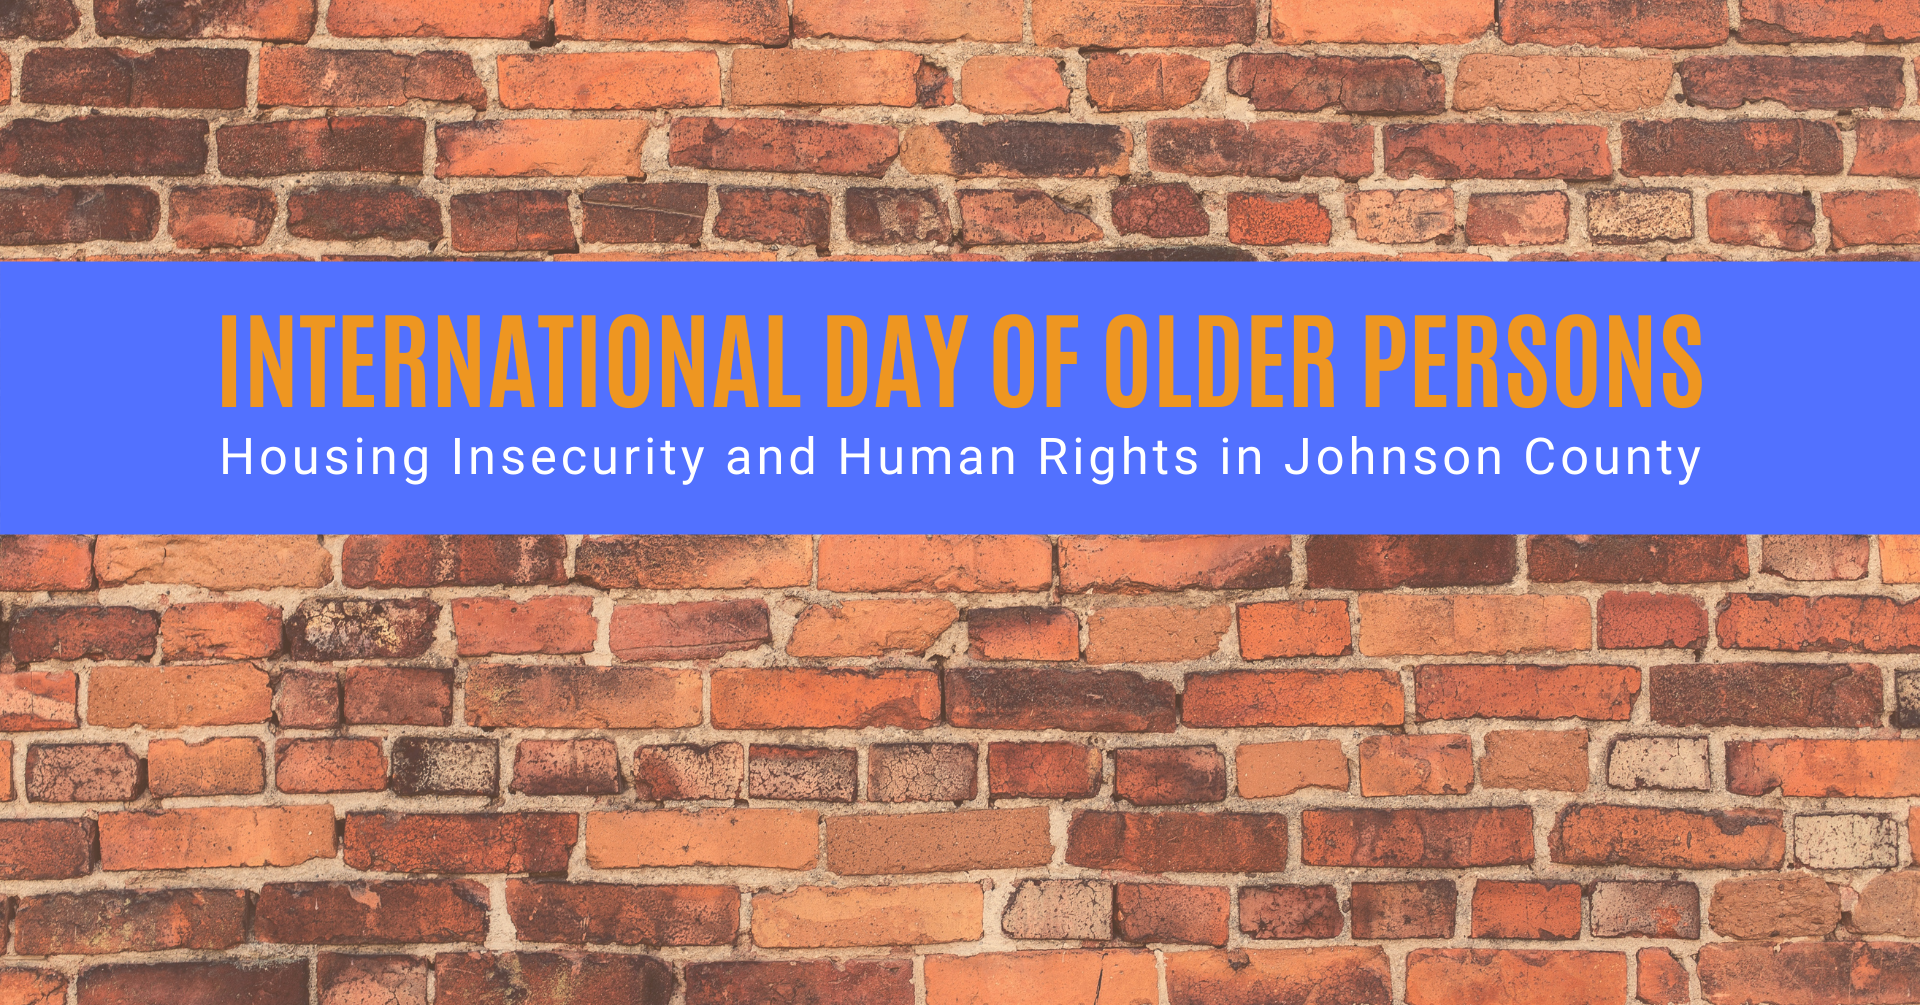 International Day of Older Persons- Housing Insecurity and Human Rights in Johnson County promotional image